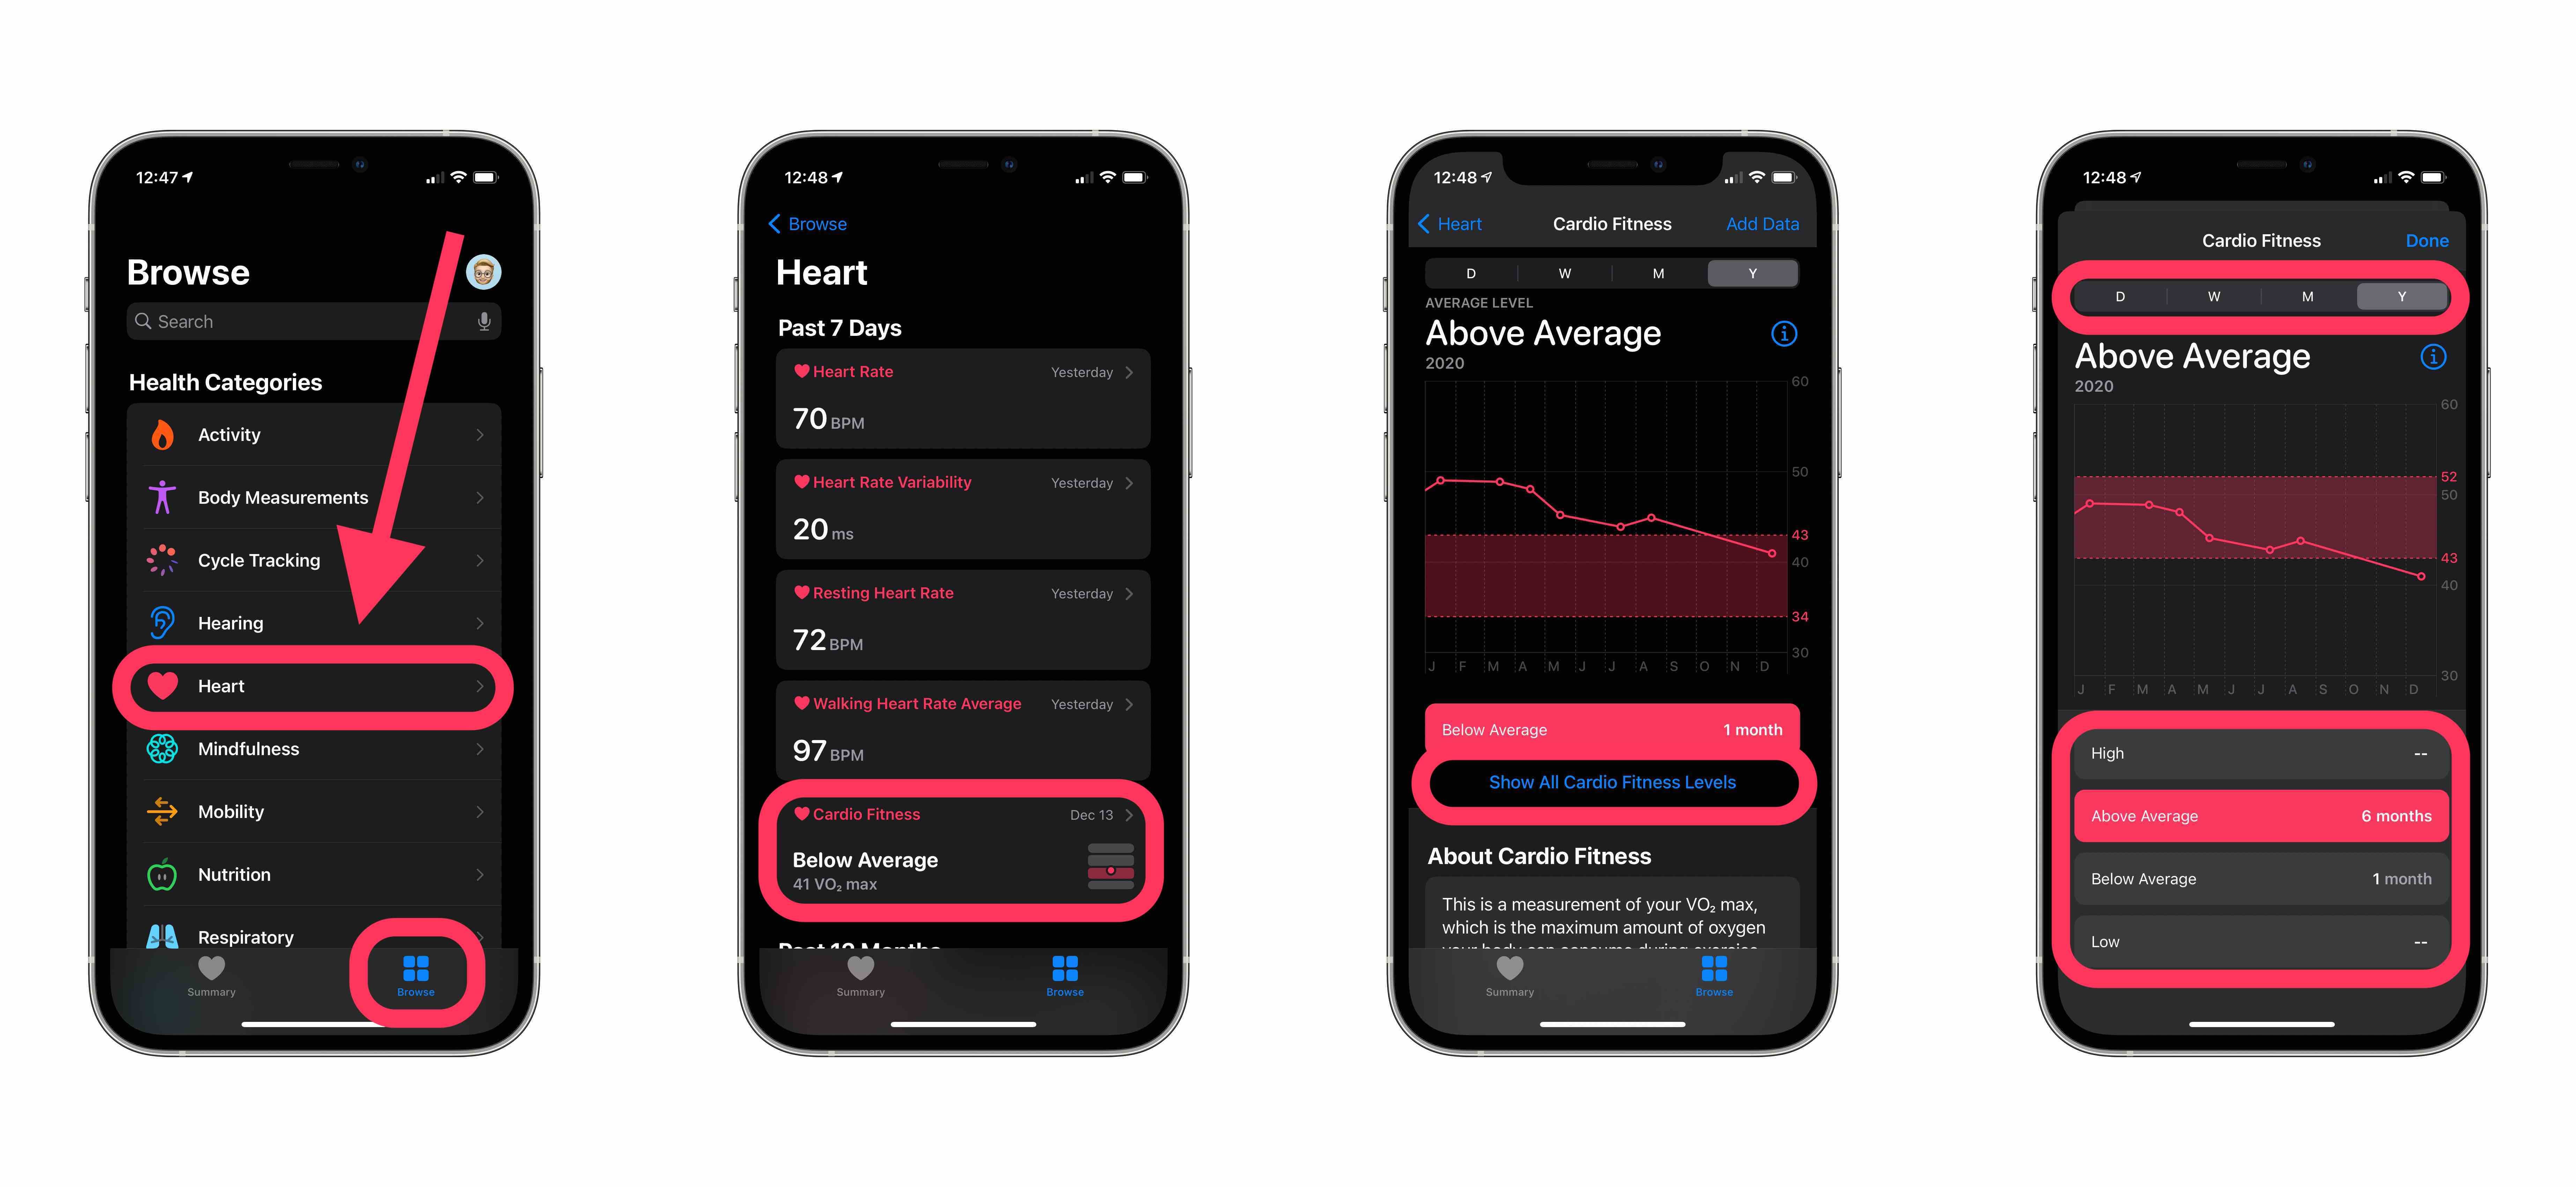 Tutorial Details on How to Use Cardio Fitness on iPhone Apple Watch